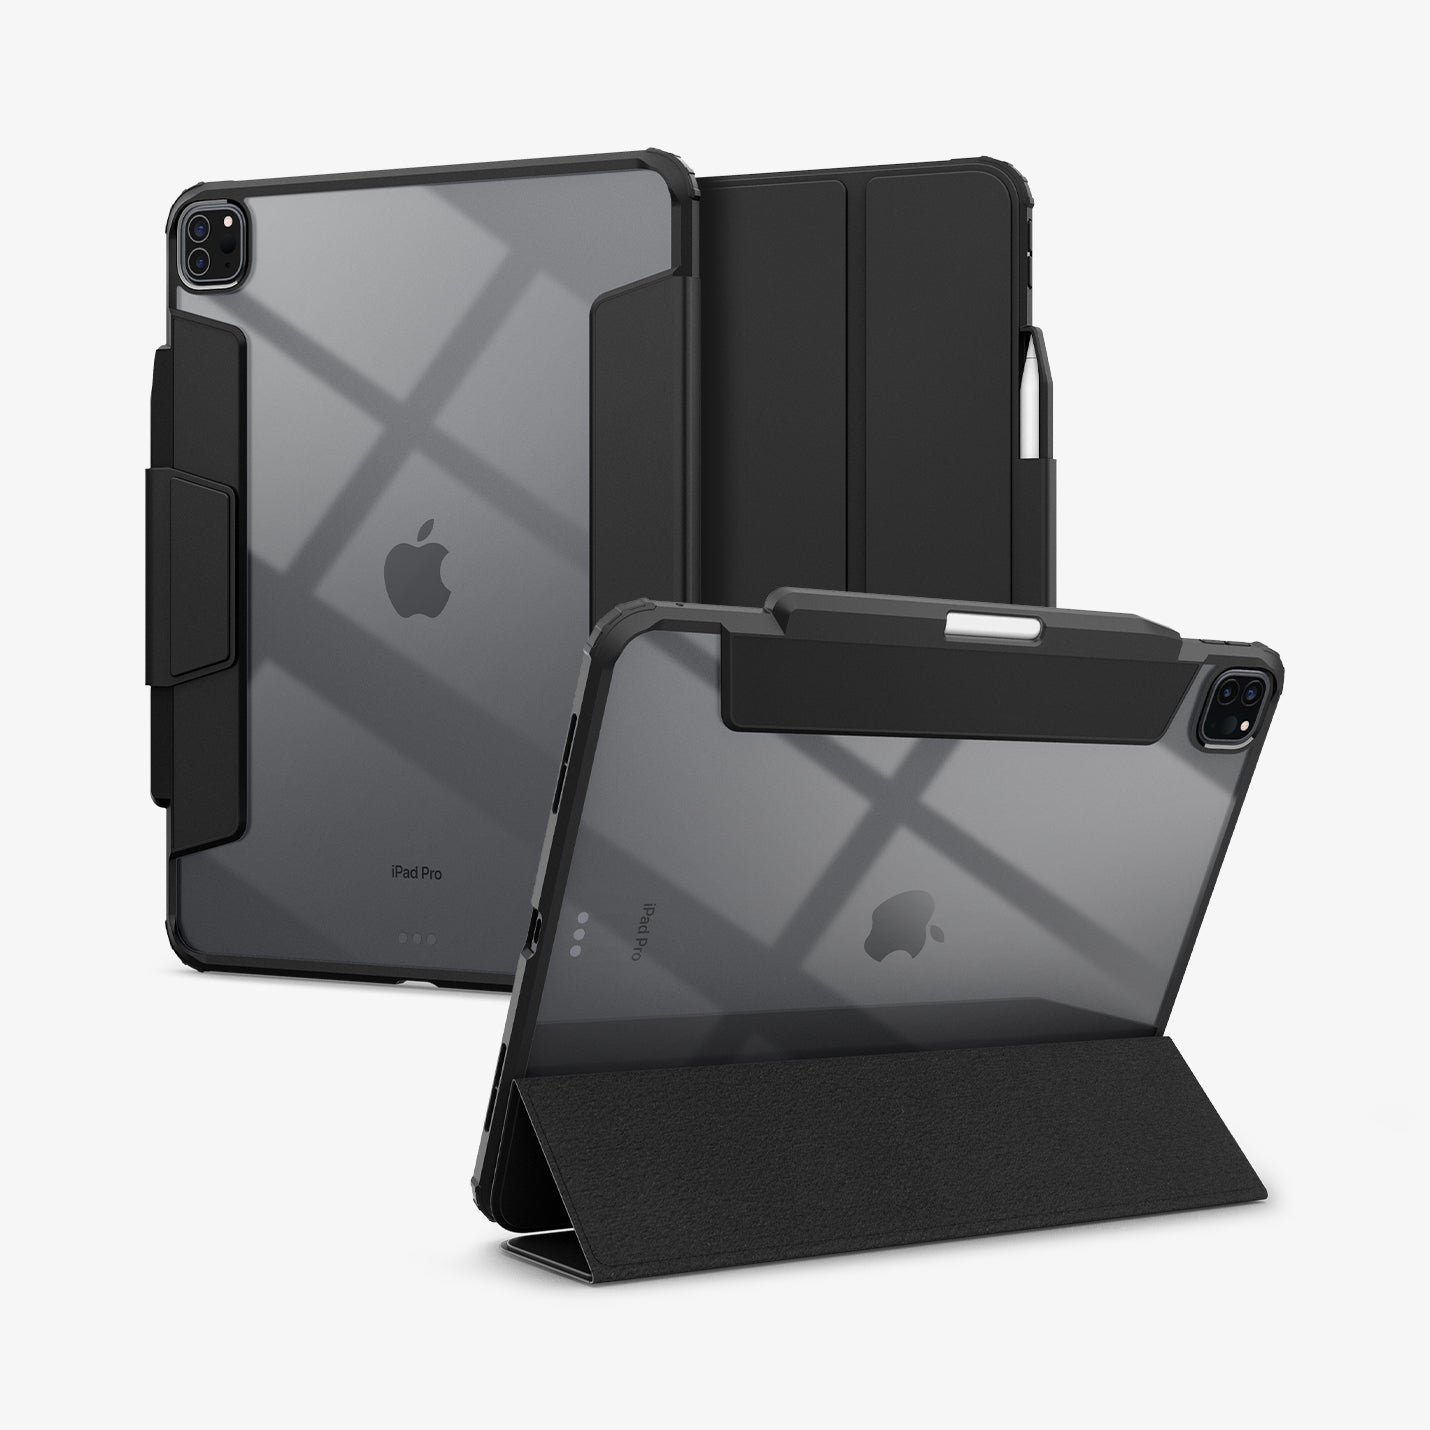 ACS07006 - iPad Pro 12.9-inch Case Ultra Hybrid Pro in Black showing the back with a folded front cover propped up as a stand, behind it, a device showing back and partial front